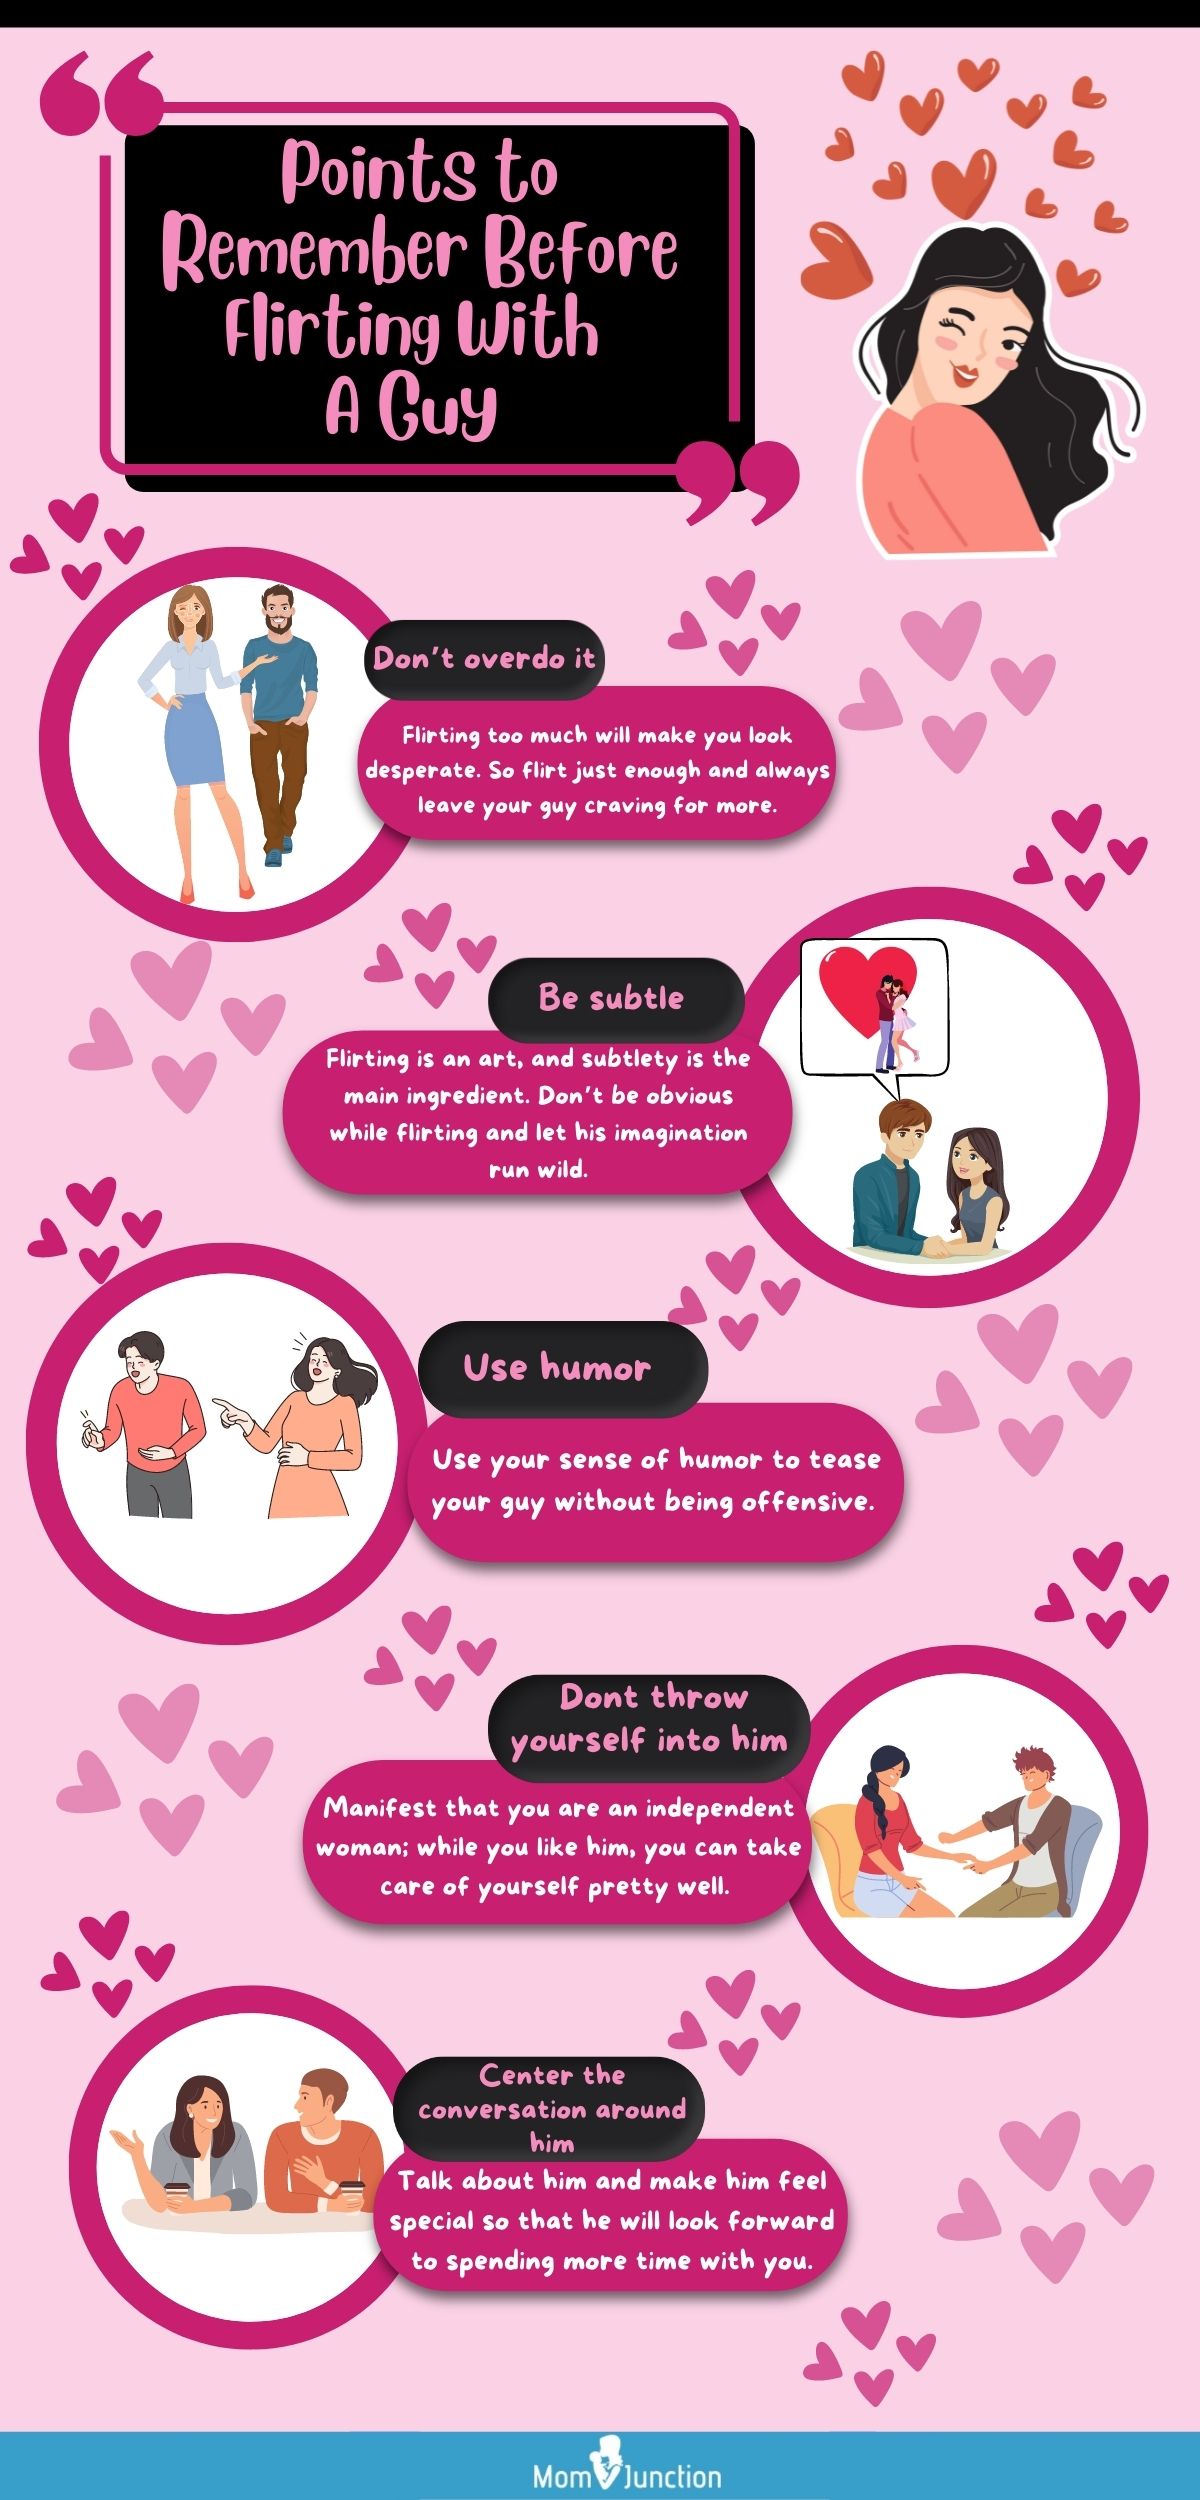 points to remember before flirting with a guy [infographic]